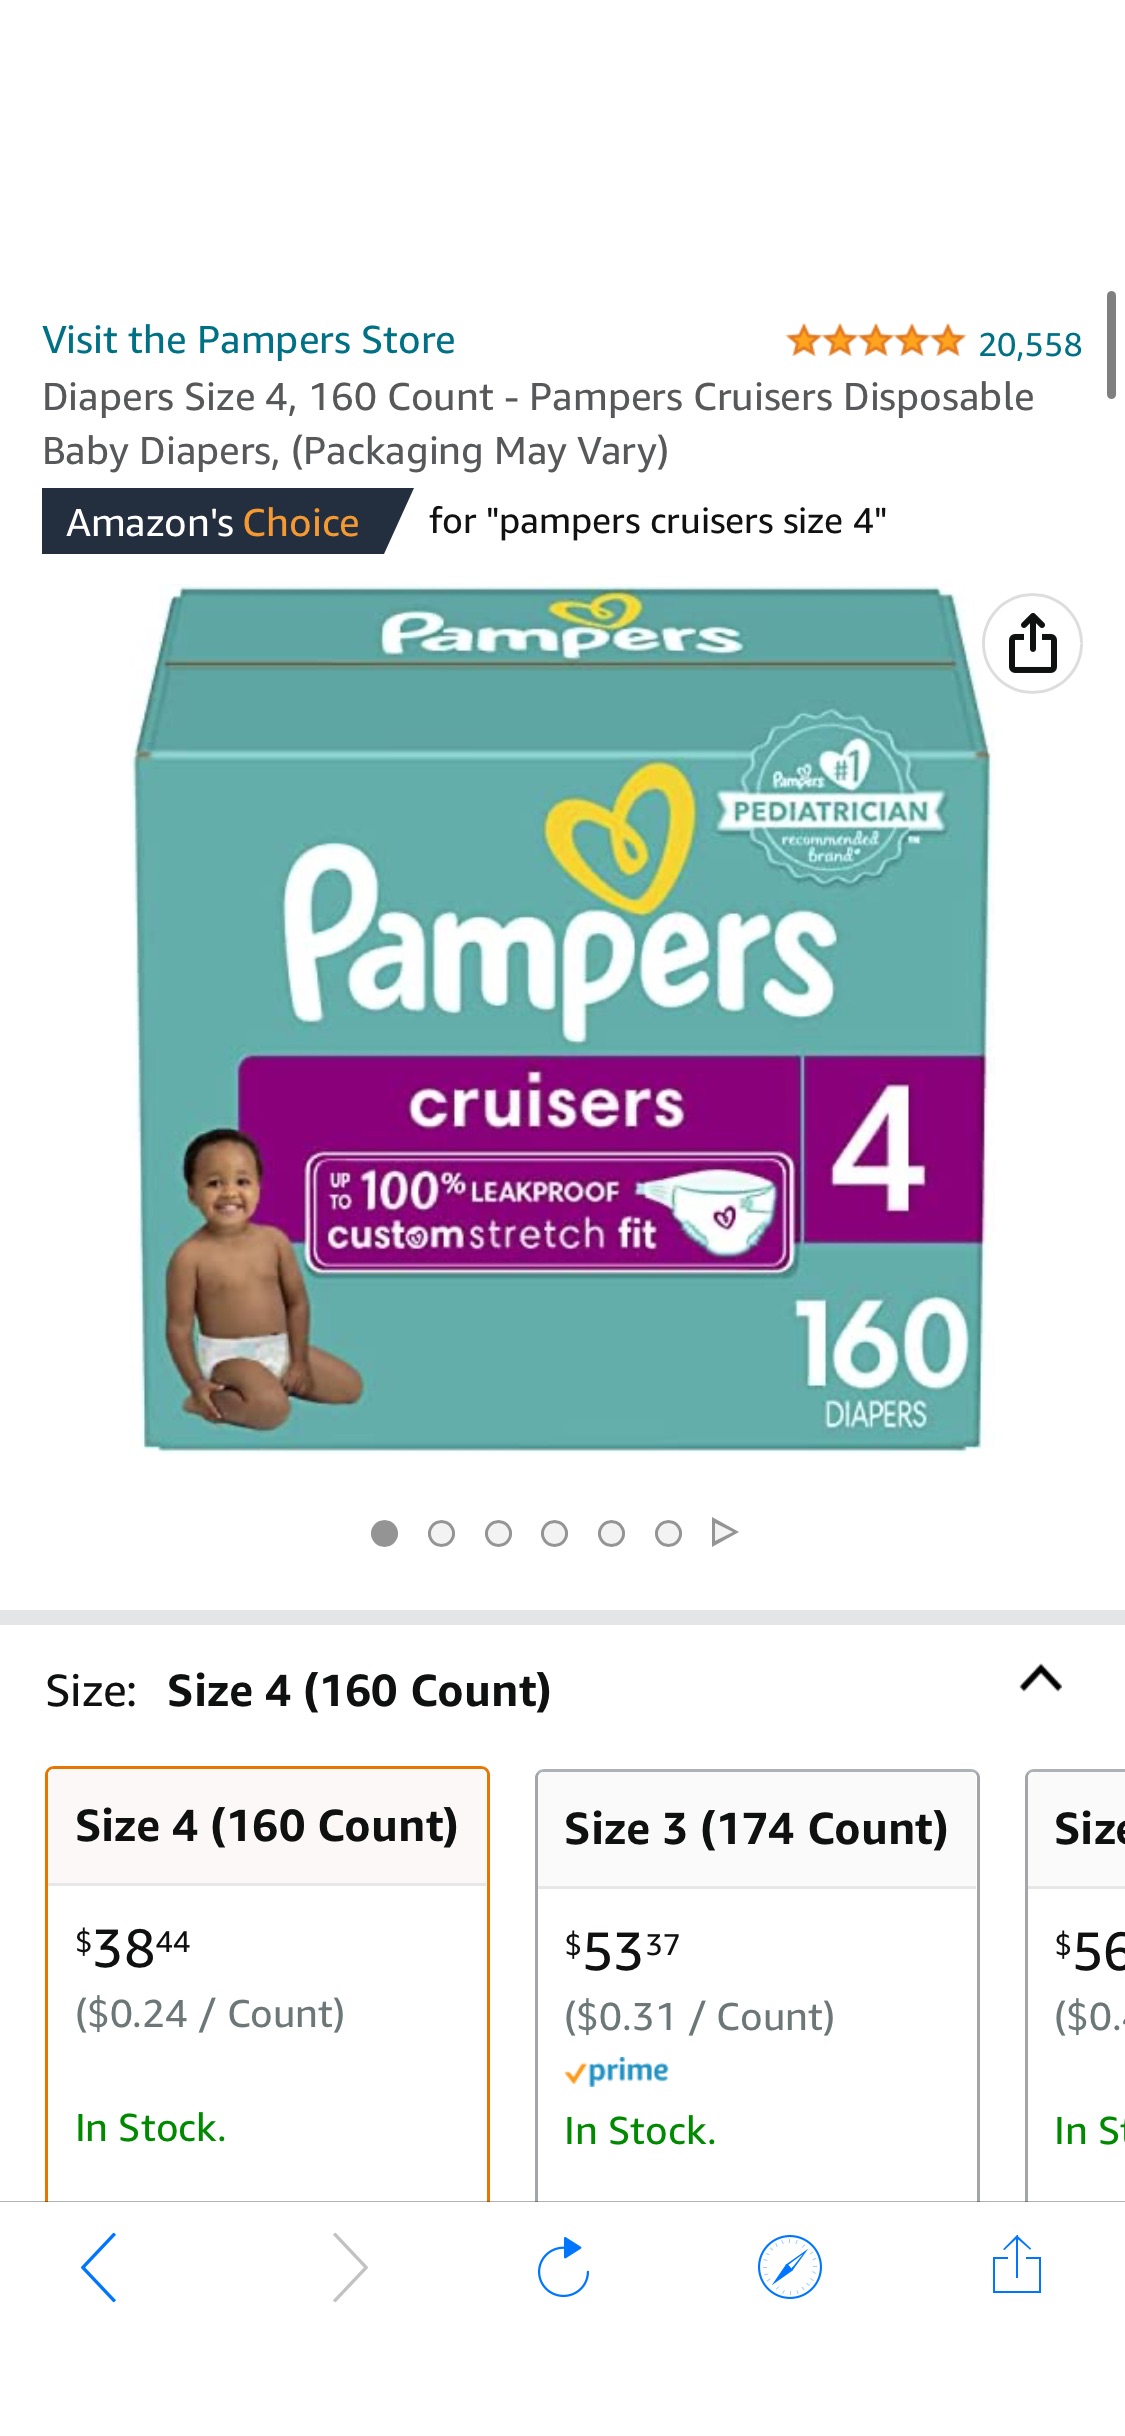 Amazon.com: Diapers Size 4, 160 Count - Pampers Cruisers Disposable Baby Diapers, (Packaging May Vary) :宝宝尿不湿